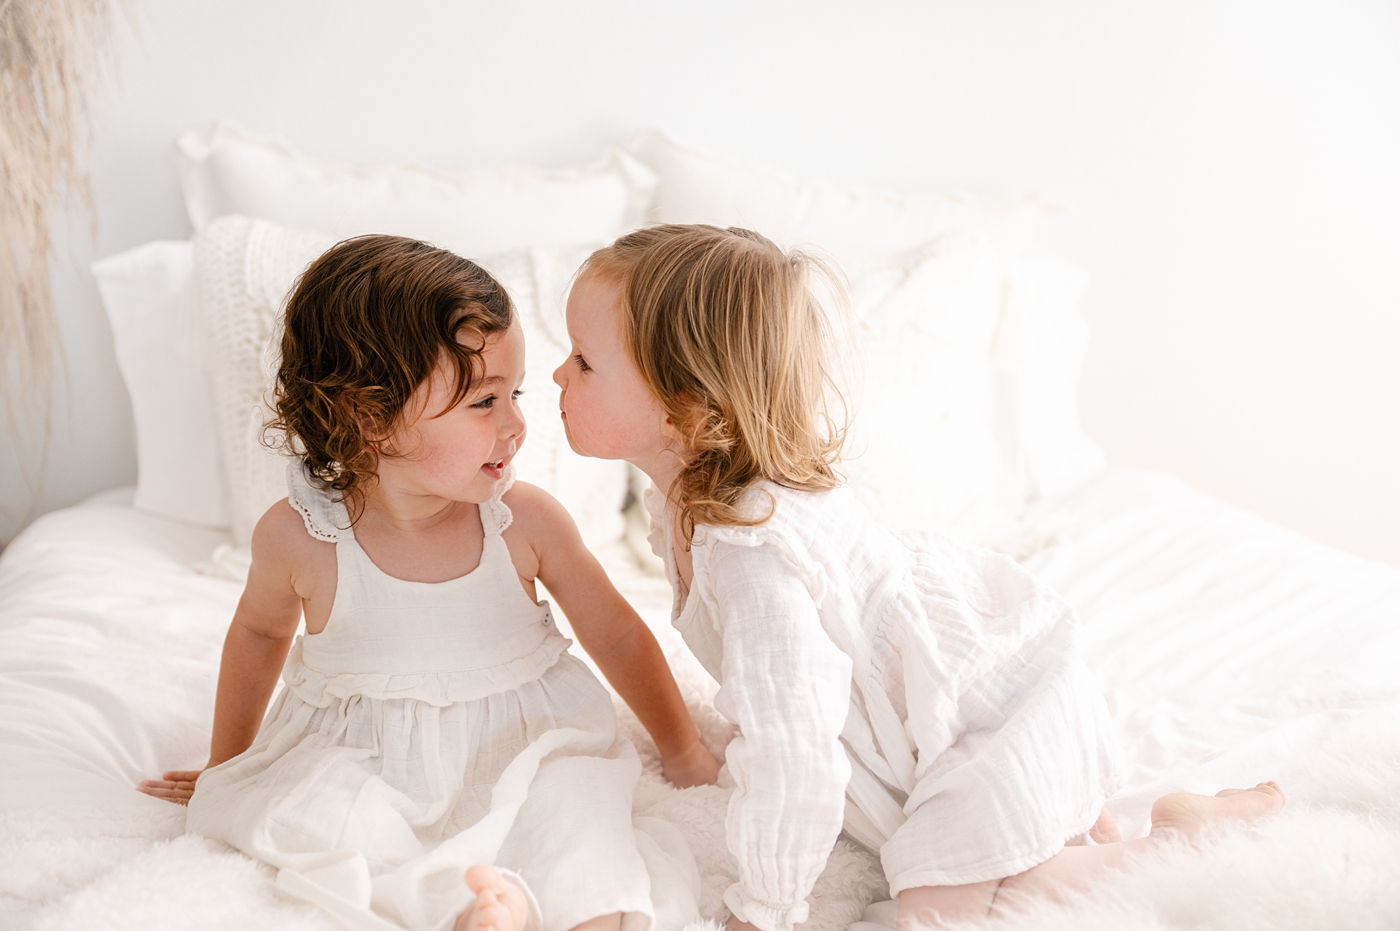 Sisters sitting on all white studio bed together during toddler milestone session. Photo by Meg Newton Photography.